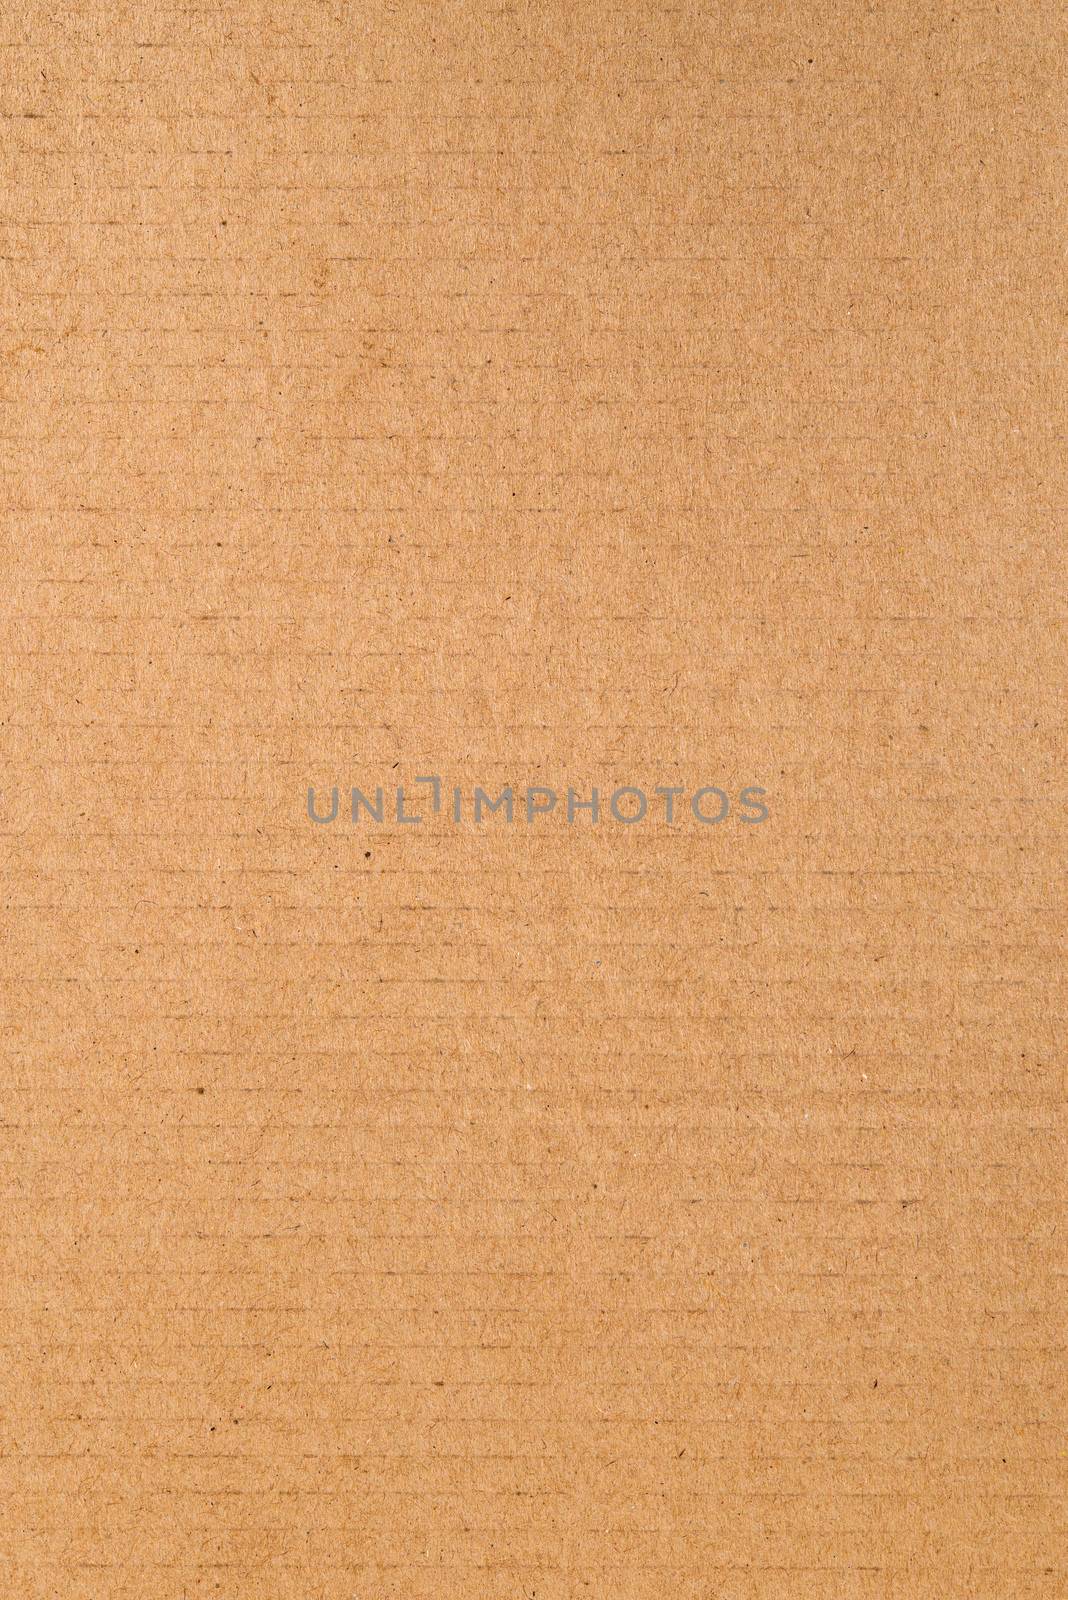 corrugated paper texture by antpkr